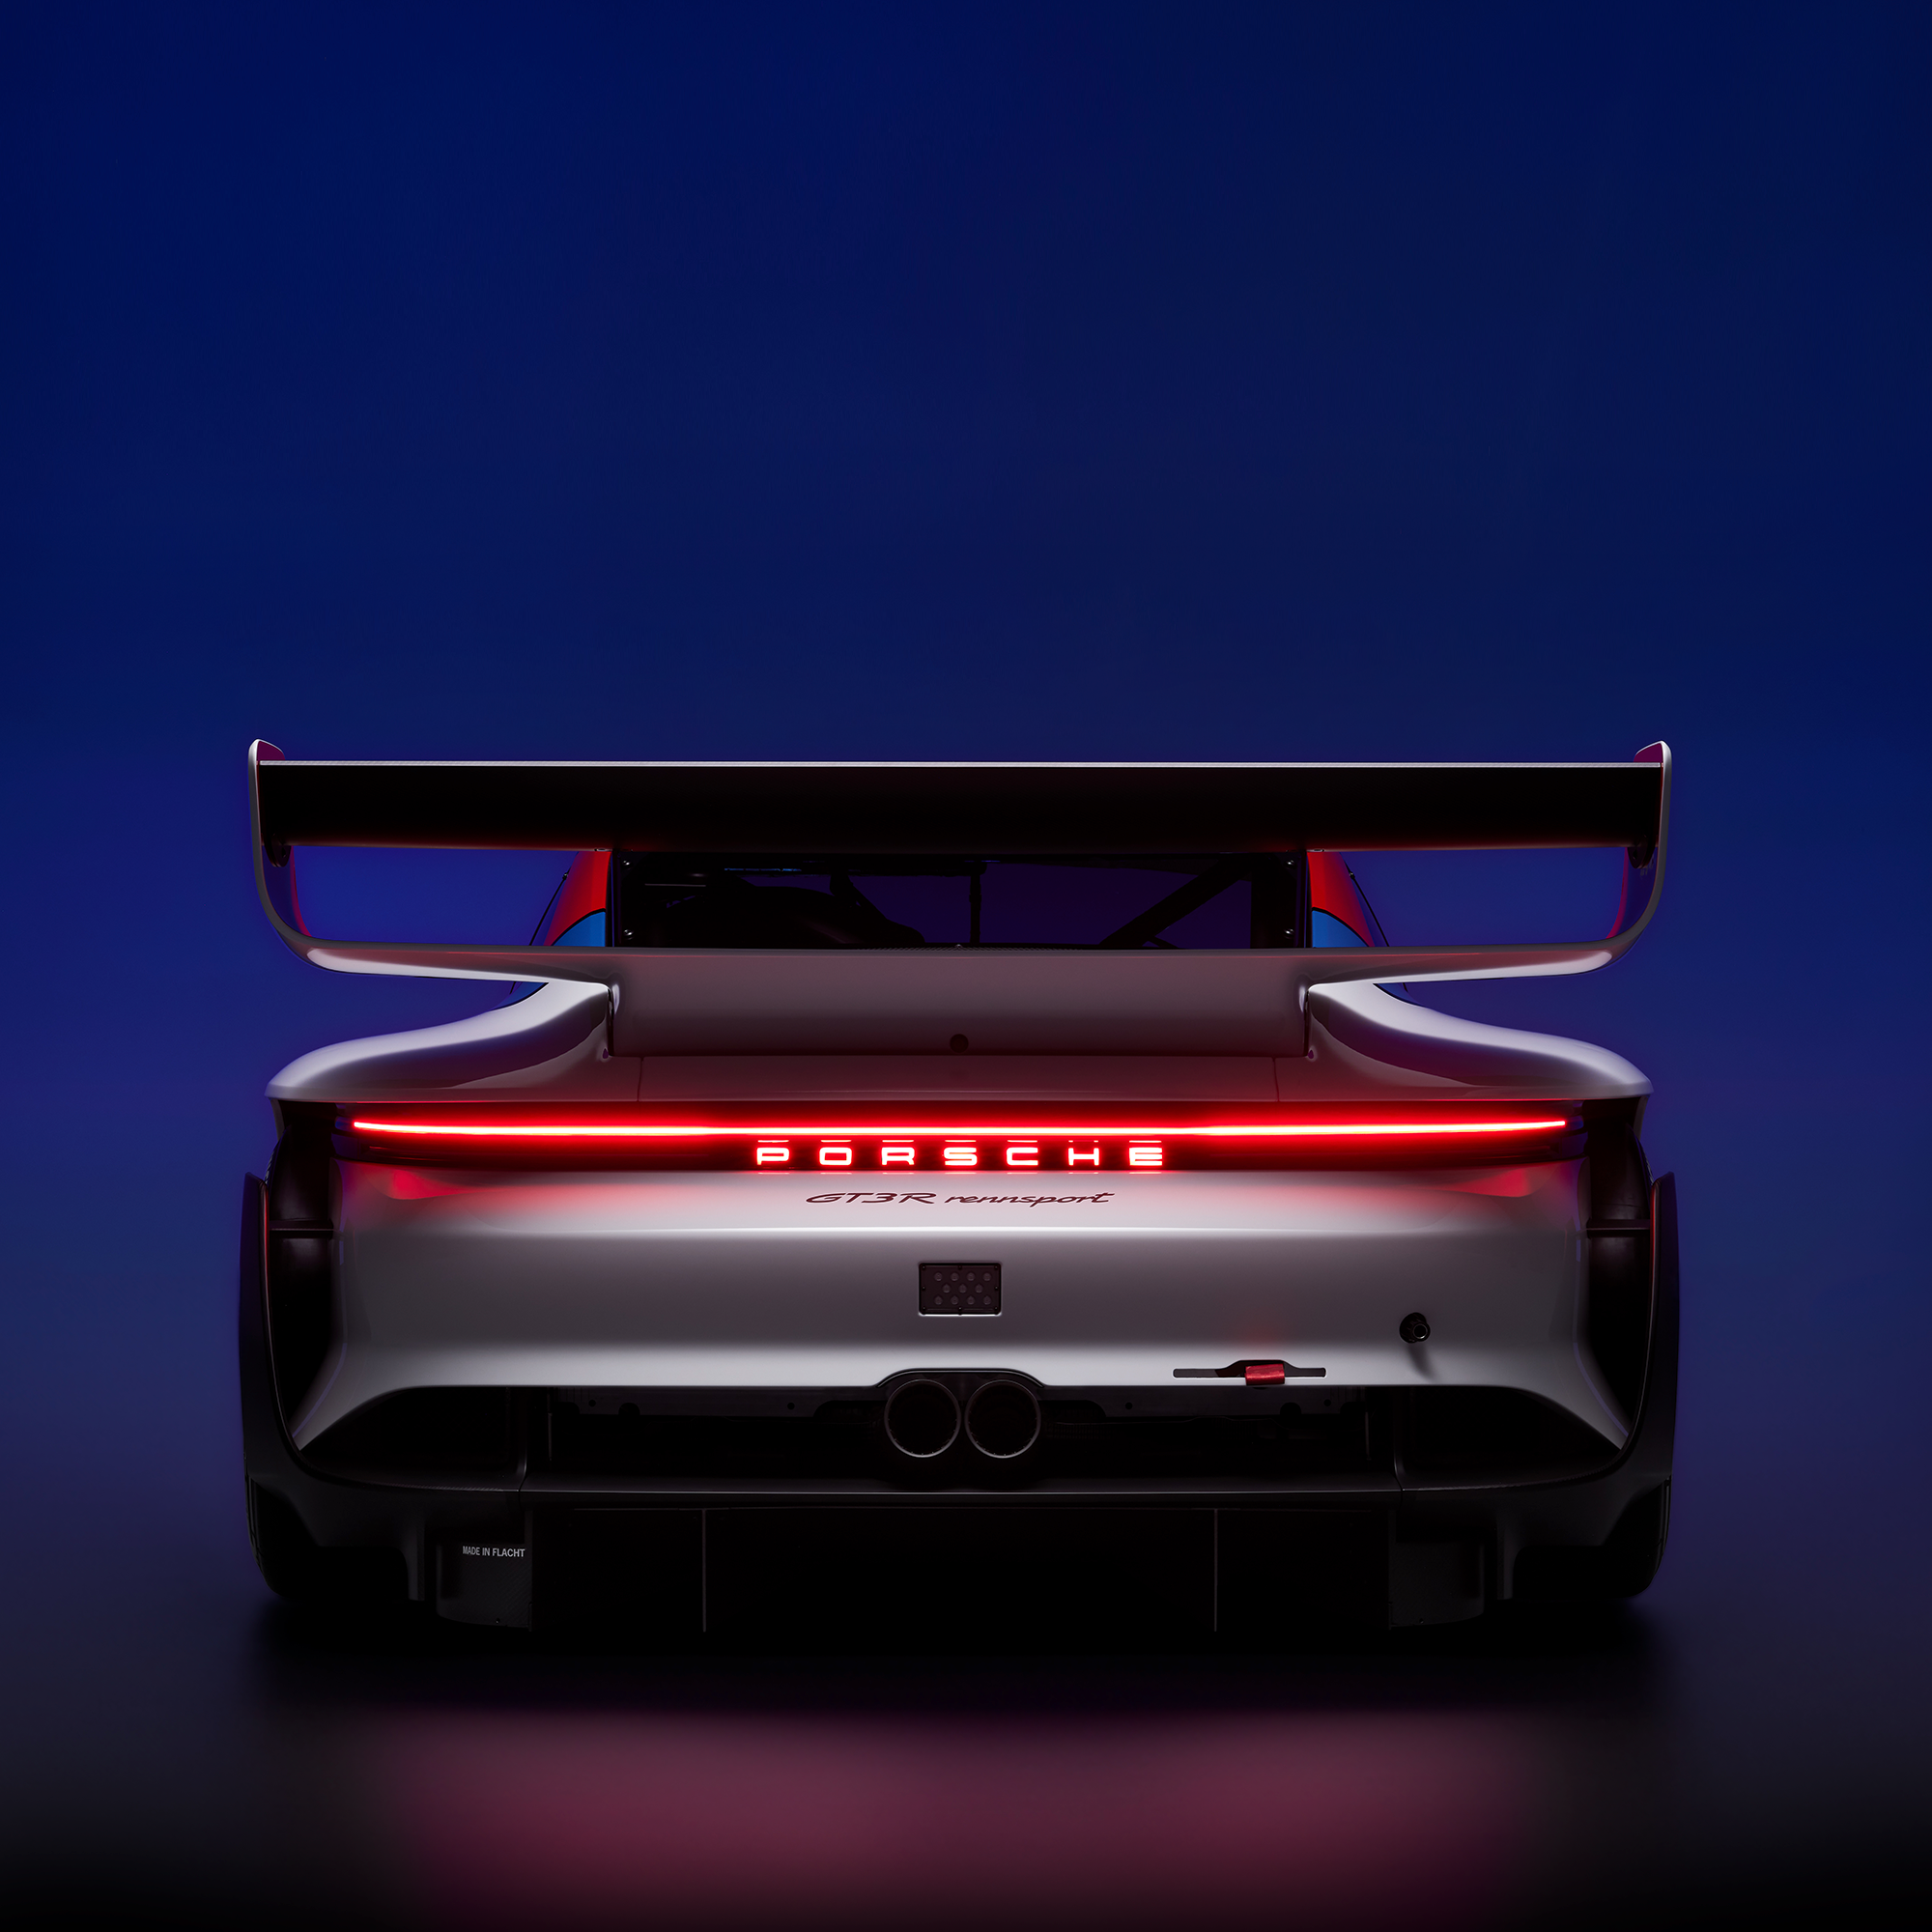 Porsche GT3 R rennsport race car, rear view with illuminated taillights